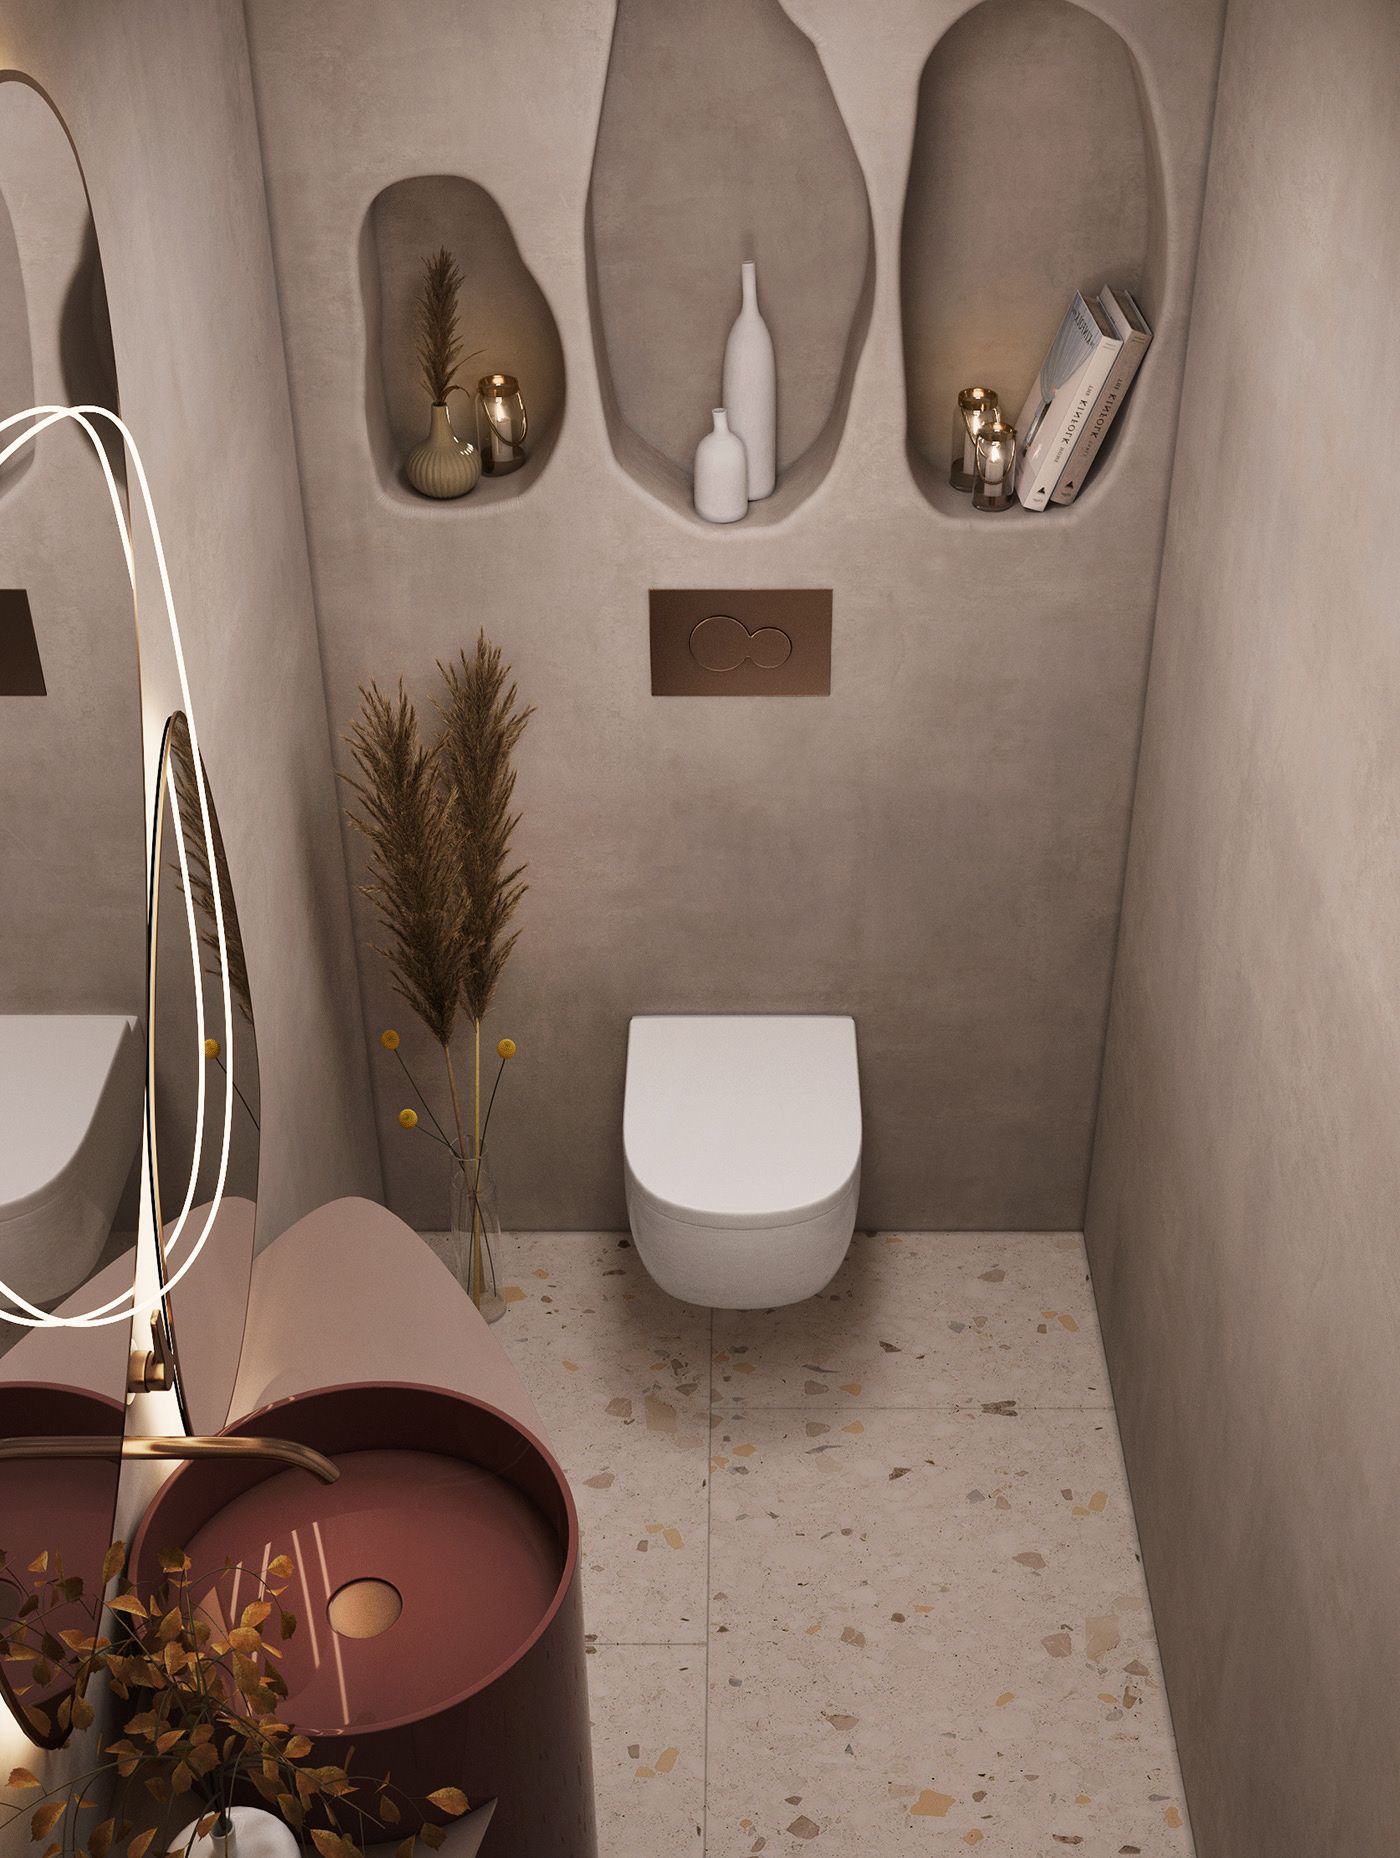 Bathroom Toilet Selection Guide: Finding the Perfect Fit for Your Space